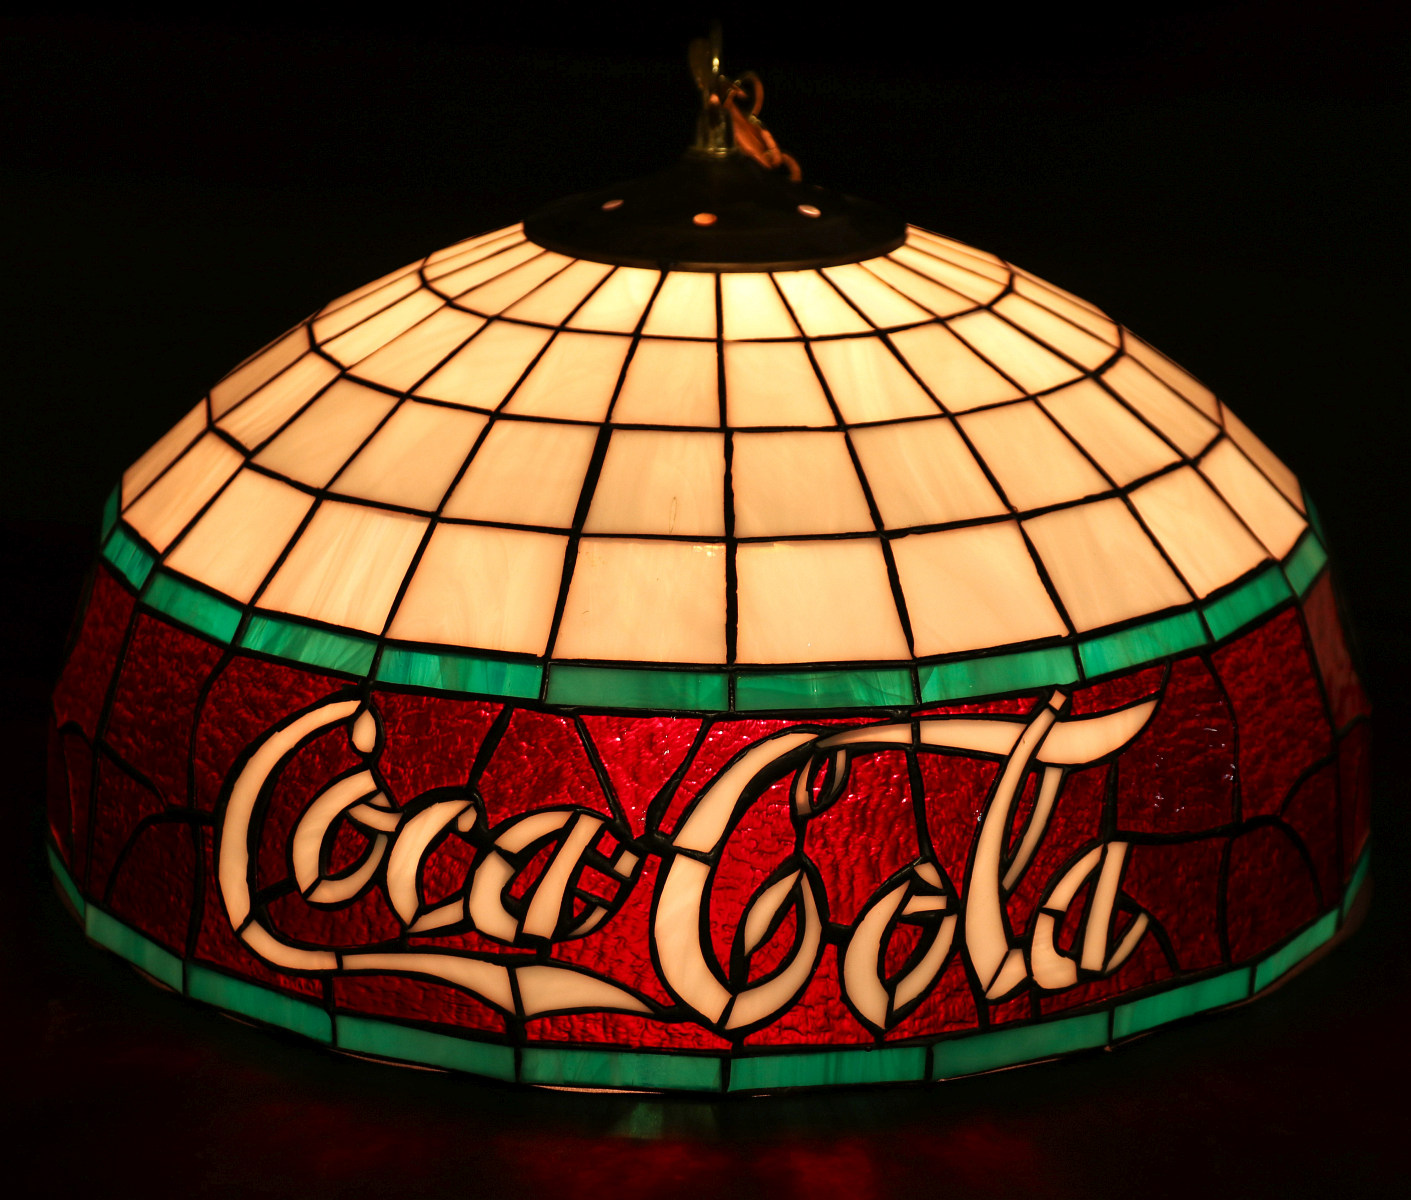 A LATE 20TH CENTURY COCA-COLA ADVERTISING LEADED LIGHT